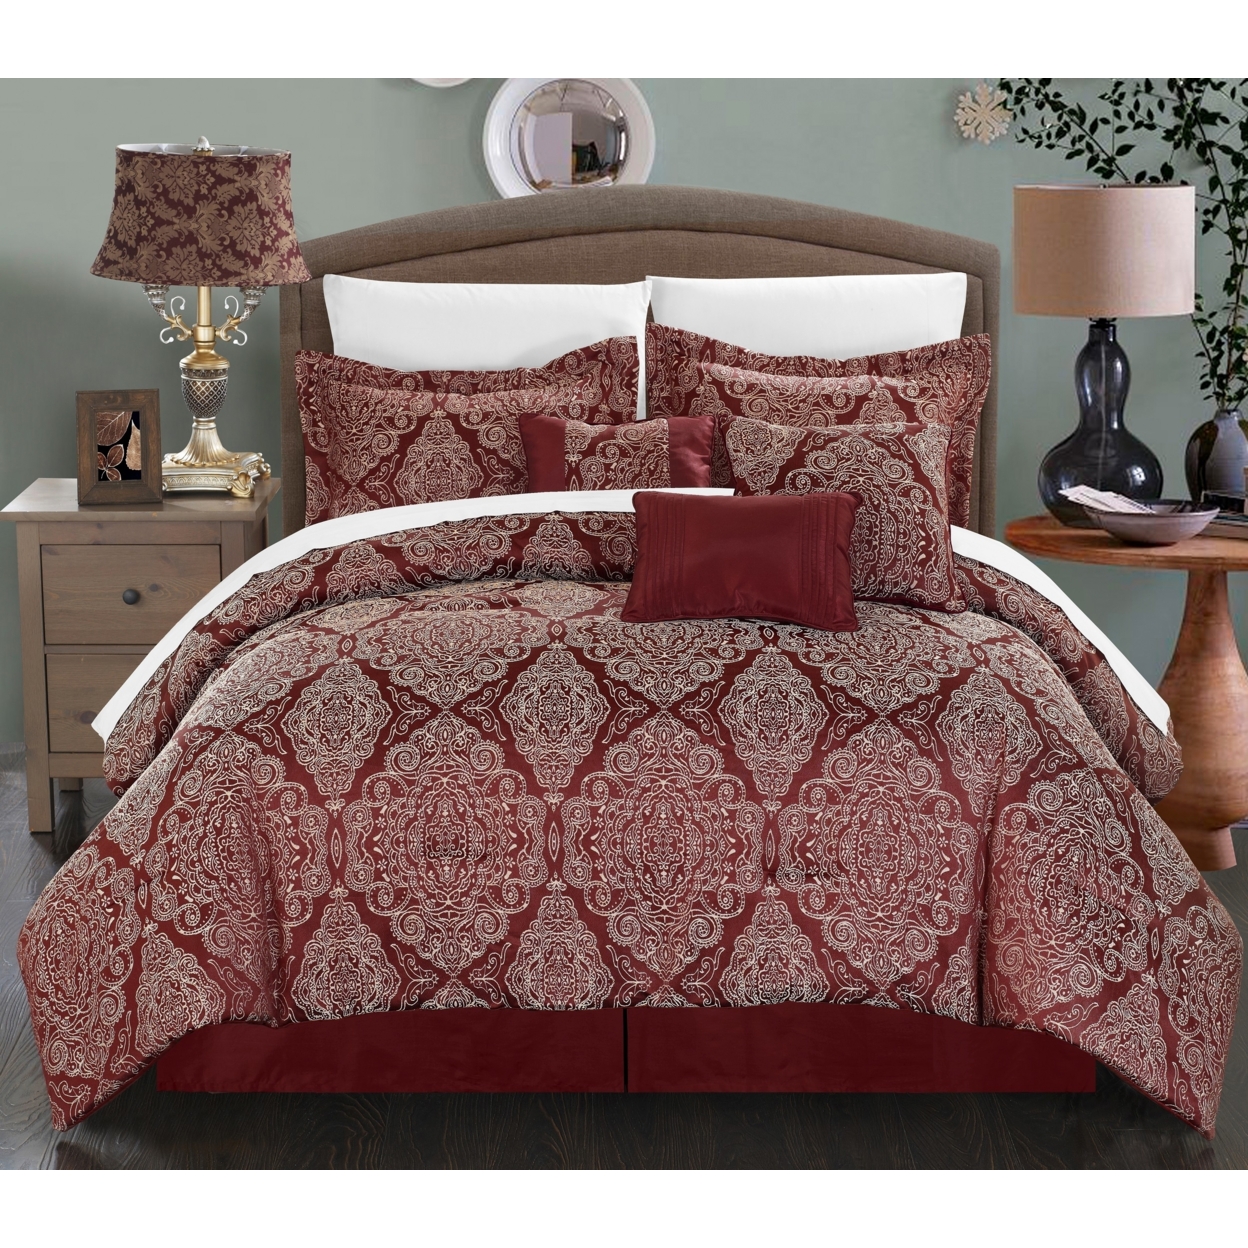 Chic Home 7 Piece Banke Embossed Traditional Jacquard Motif Comforter Set Shams And Decorative Pillows Included - Red, King